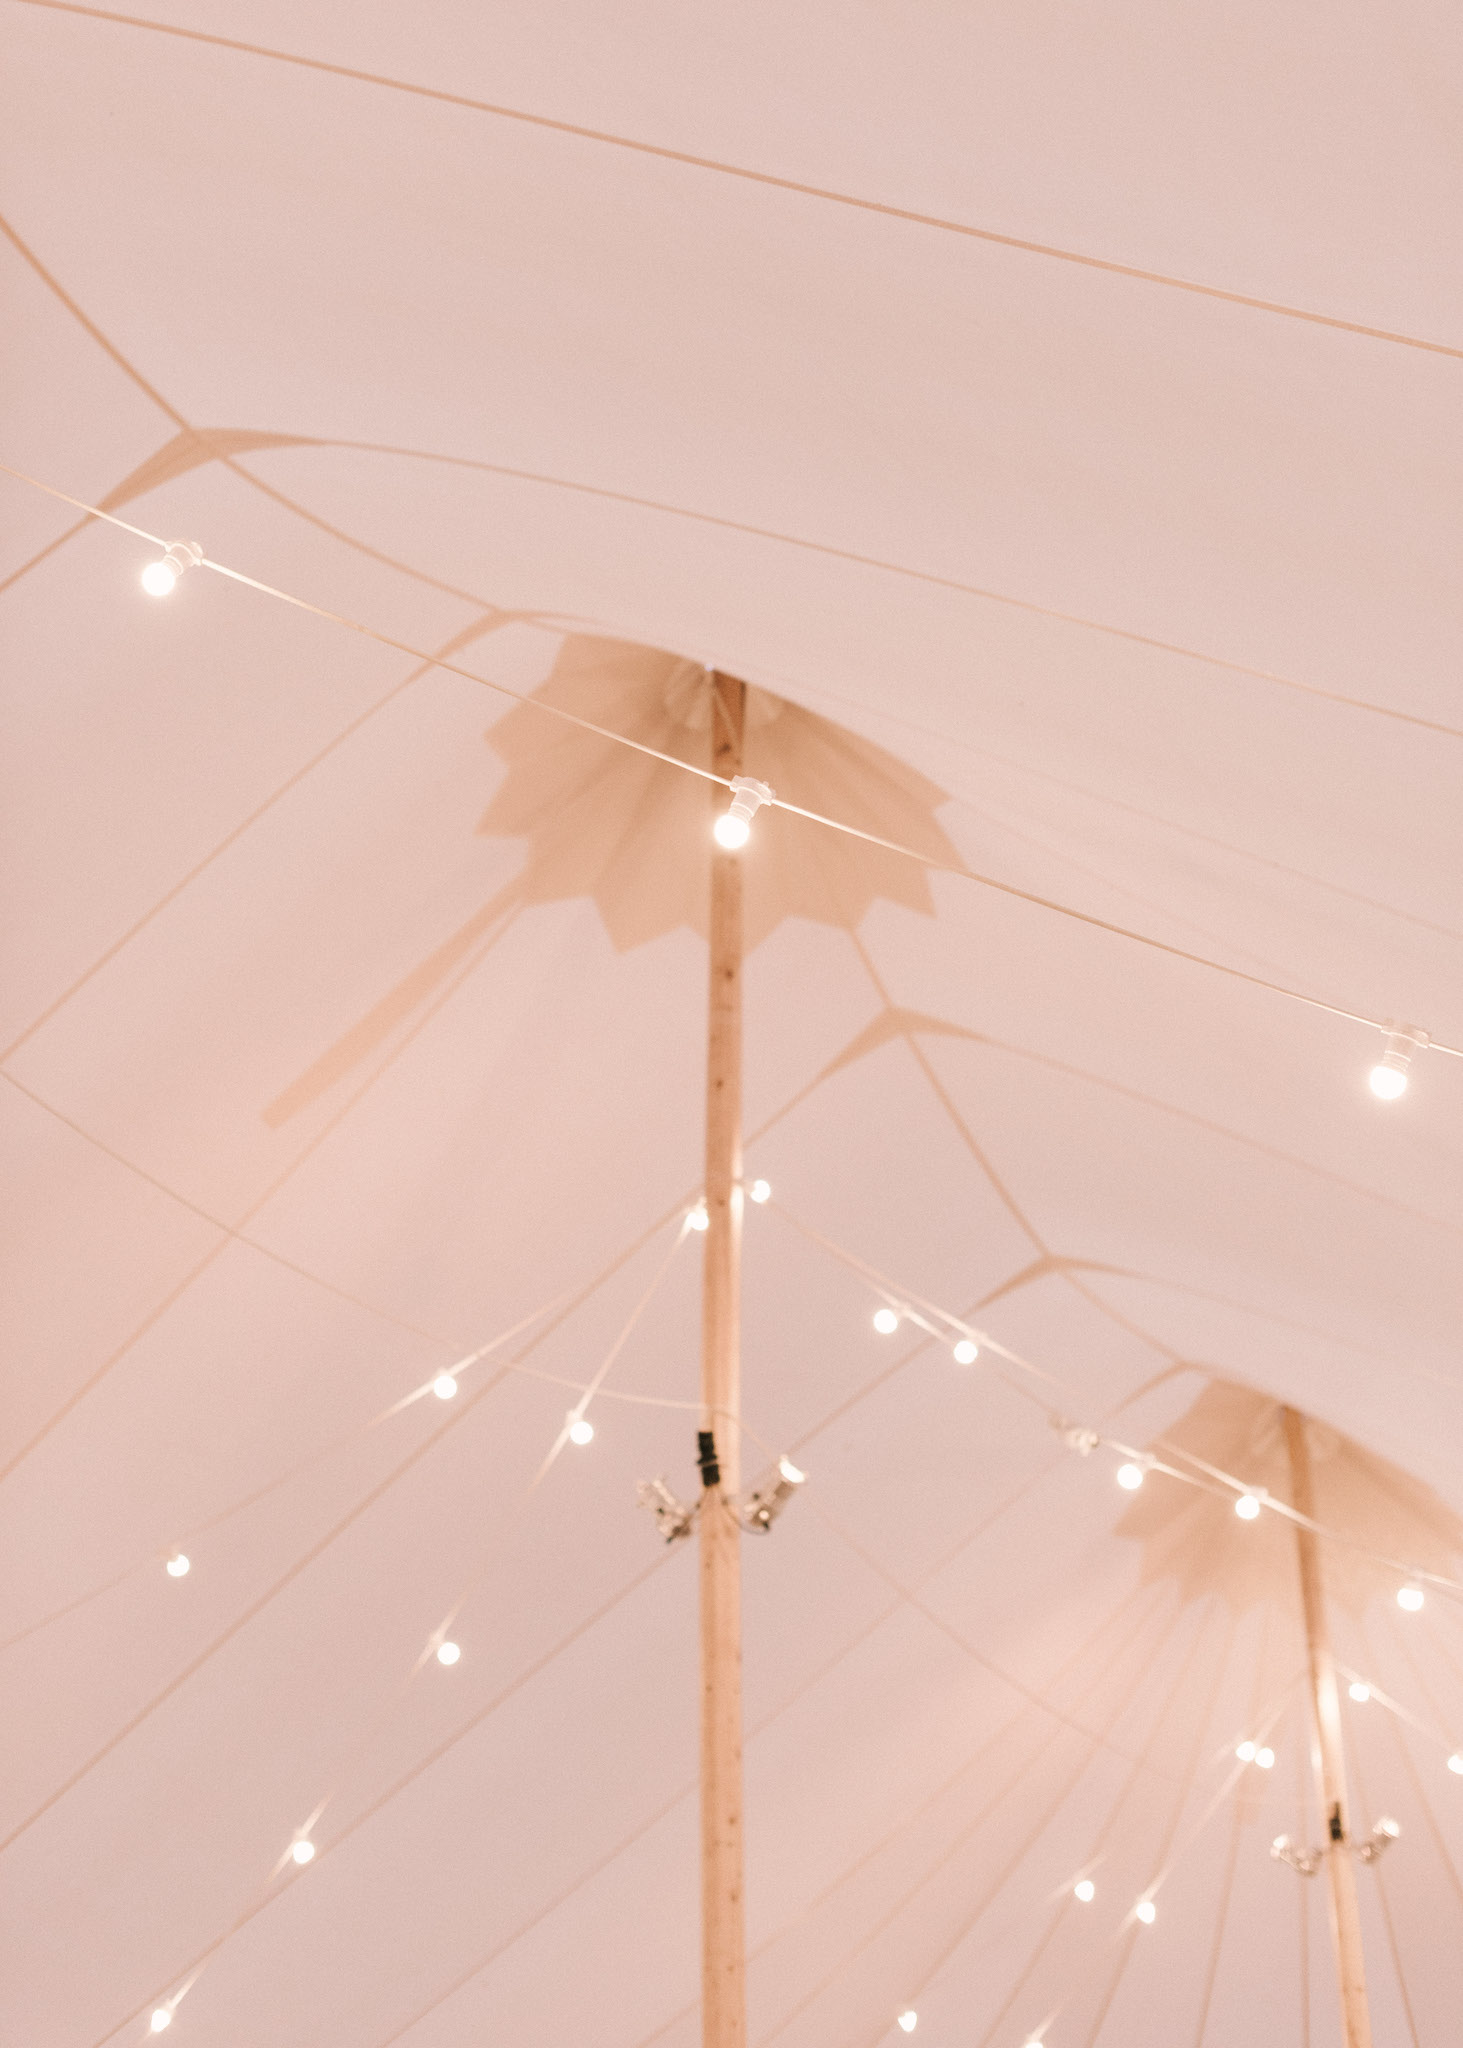 Planning an outdoor Sperry Wedding, Sperry Tent canvas detailing. Planning by Katrina Otter Weddings with The Sail Tent Company